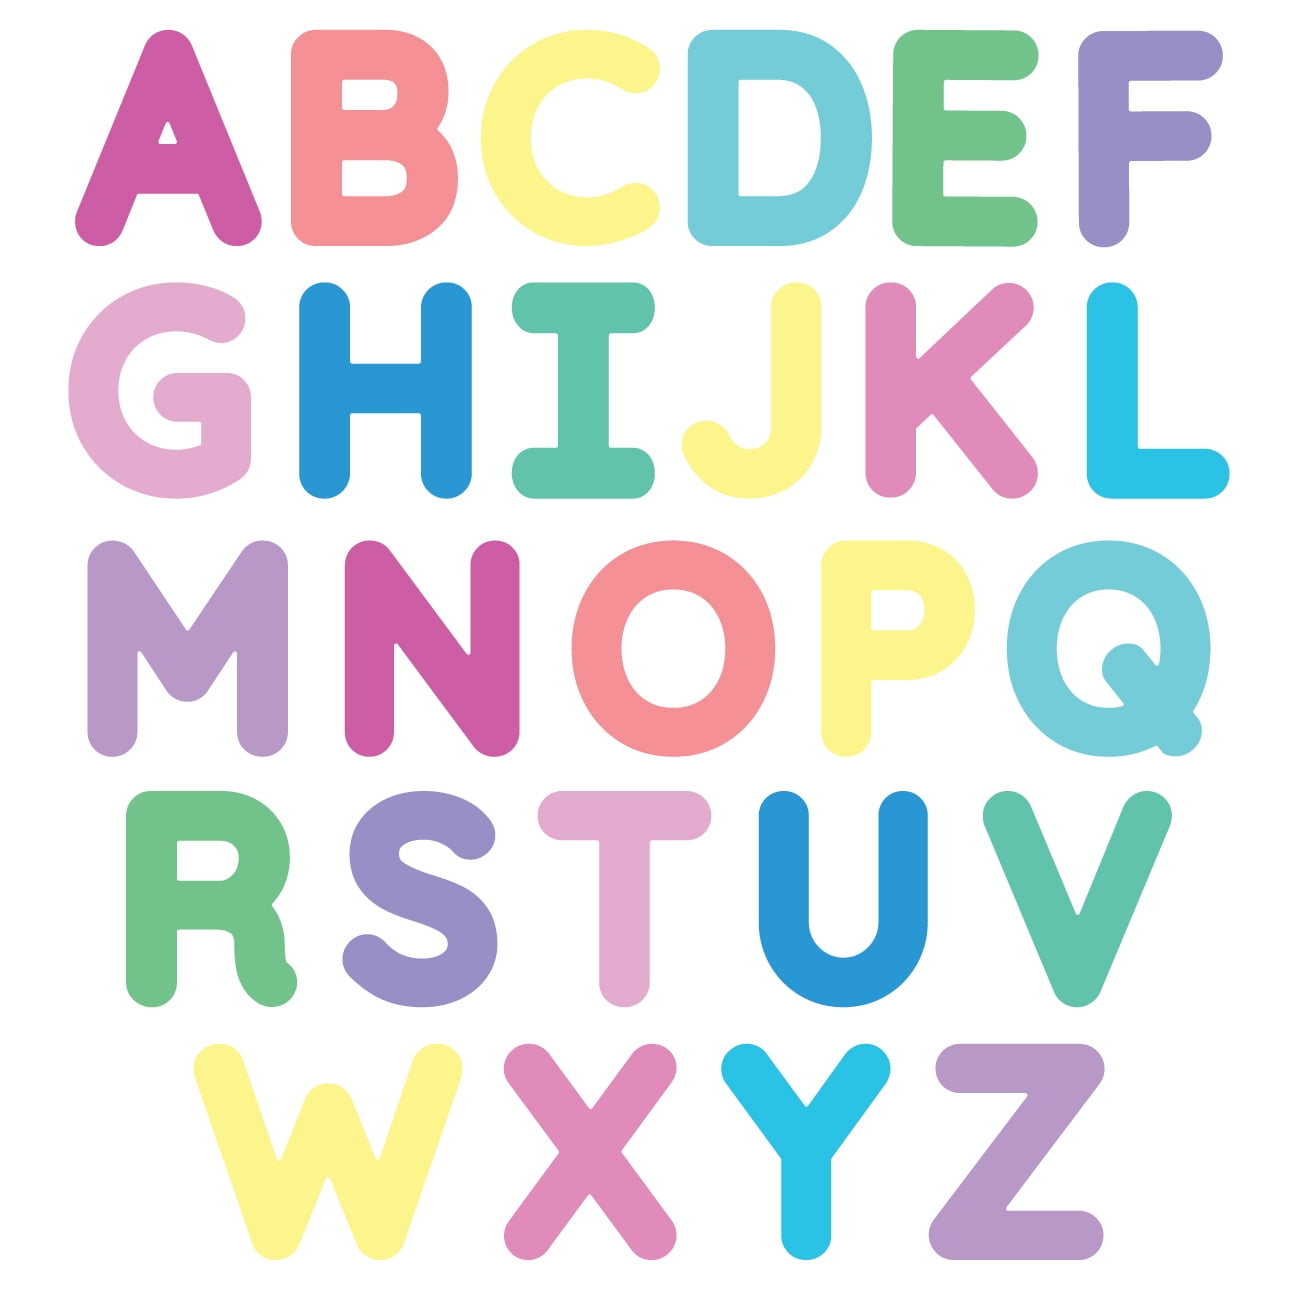 StikArt 3-inch Removable Peel & Stick Letter Wall Decals (Assorted ...